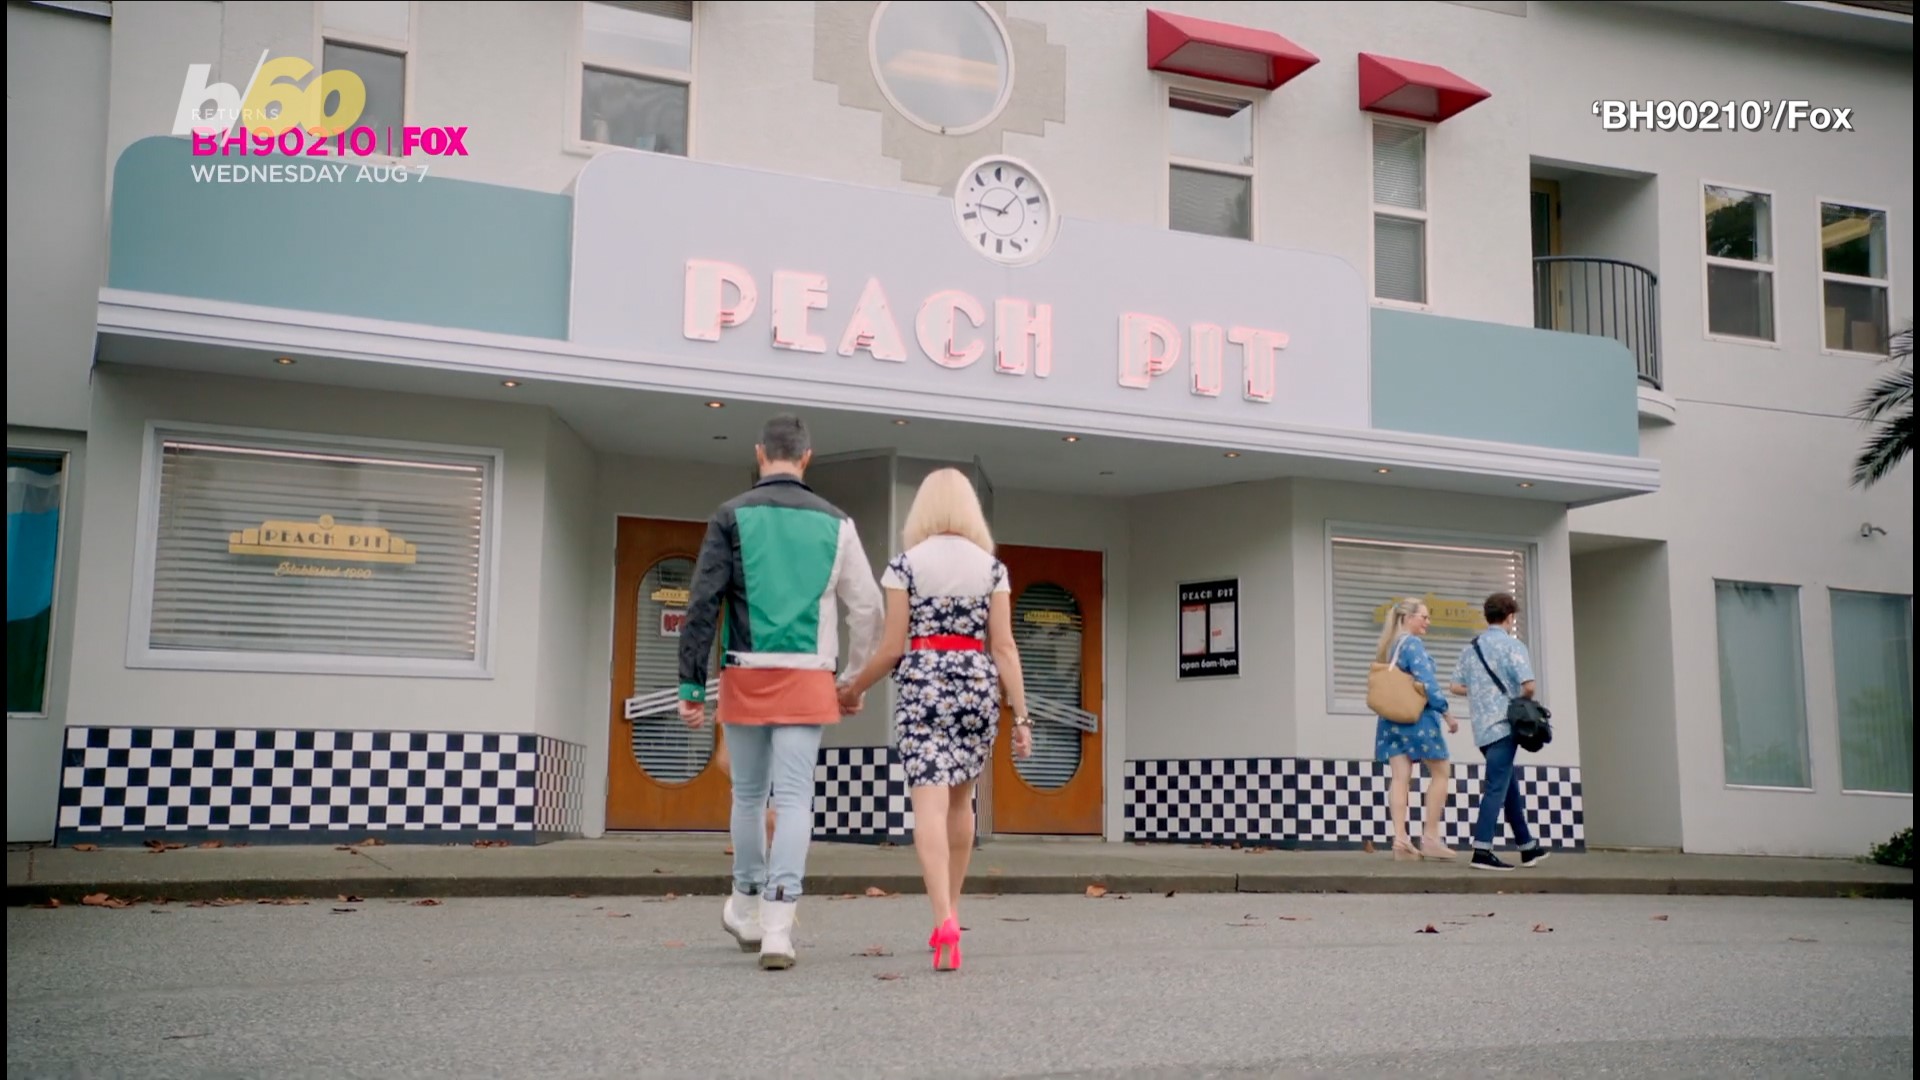 9021 0hhh Real Life Peach Pit Pop Up Set To Open In Los Angeles But For A Limited Time Ksdk Com